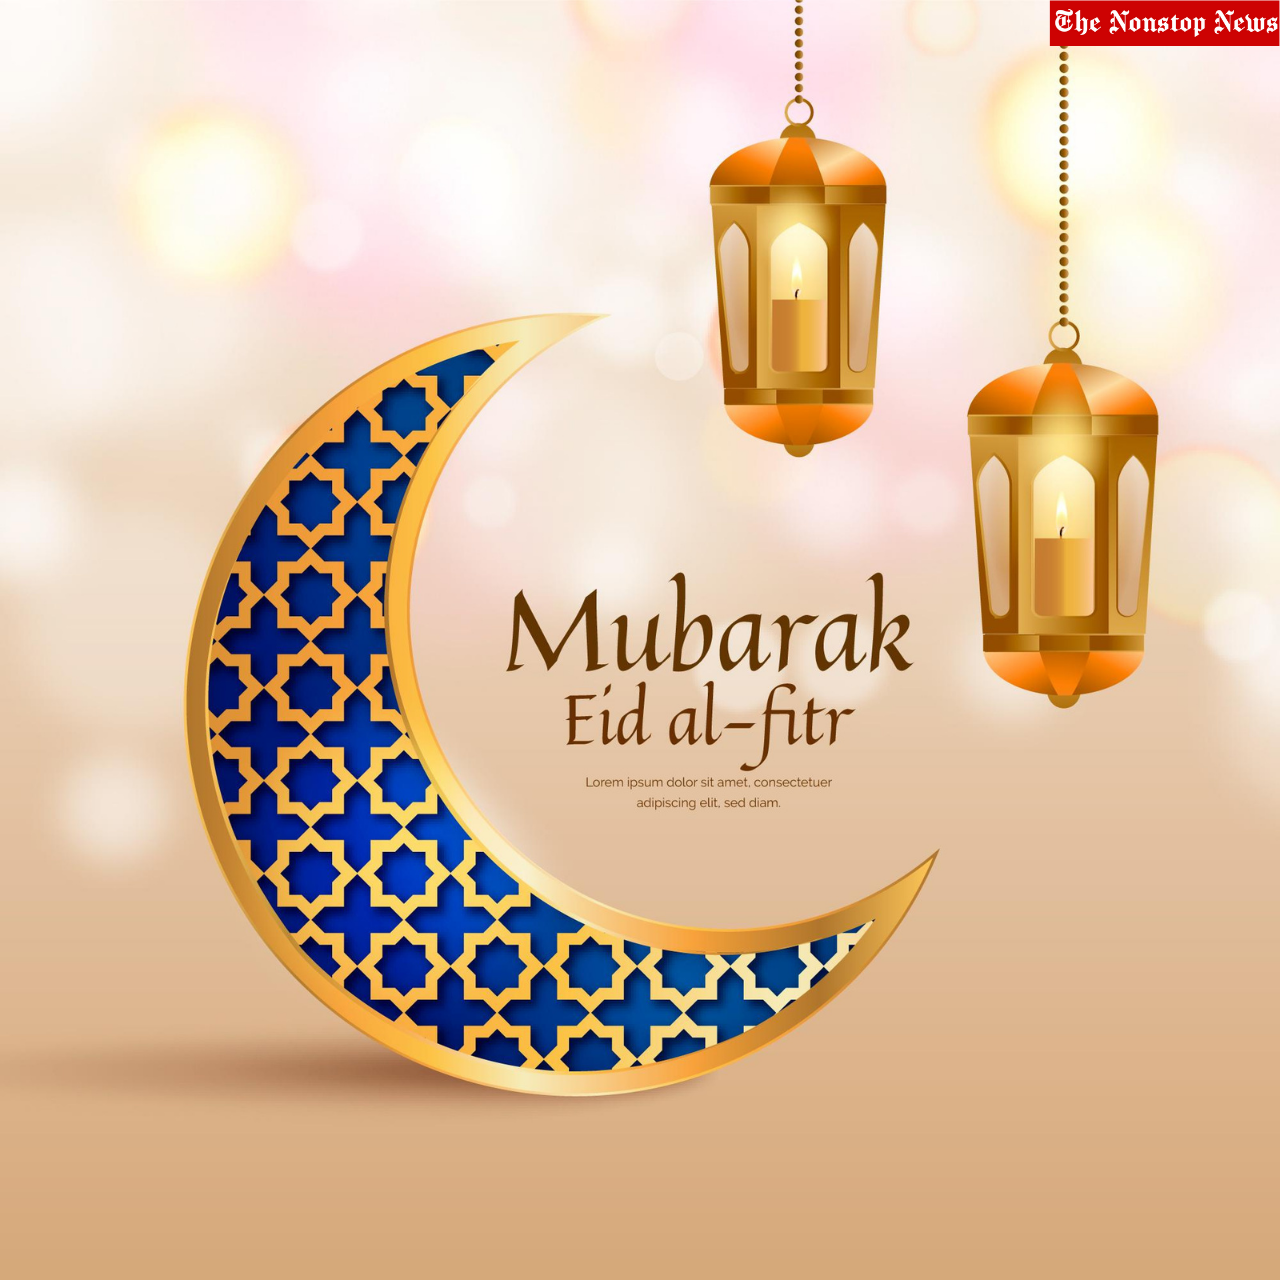 Eid Ul-Fitr 2022 Wishes in Advance: Quotes, Messages, HD Images, Greetings to greet your Loved Ones